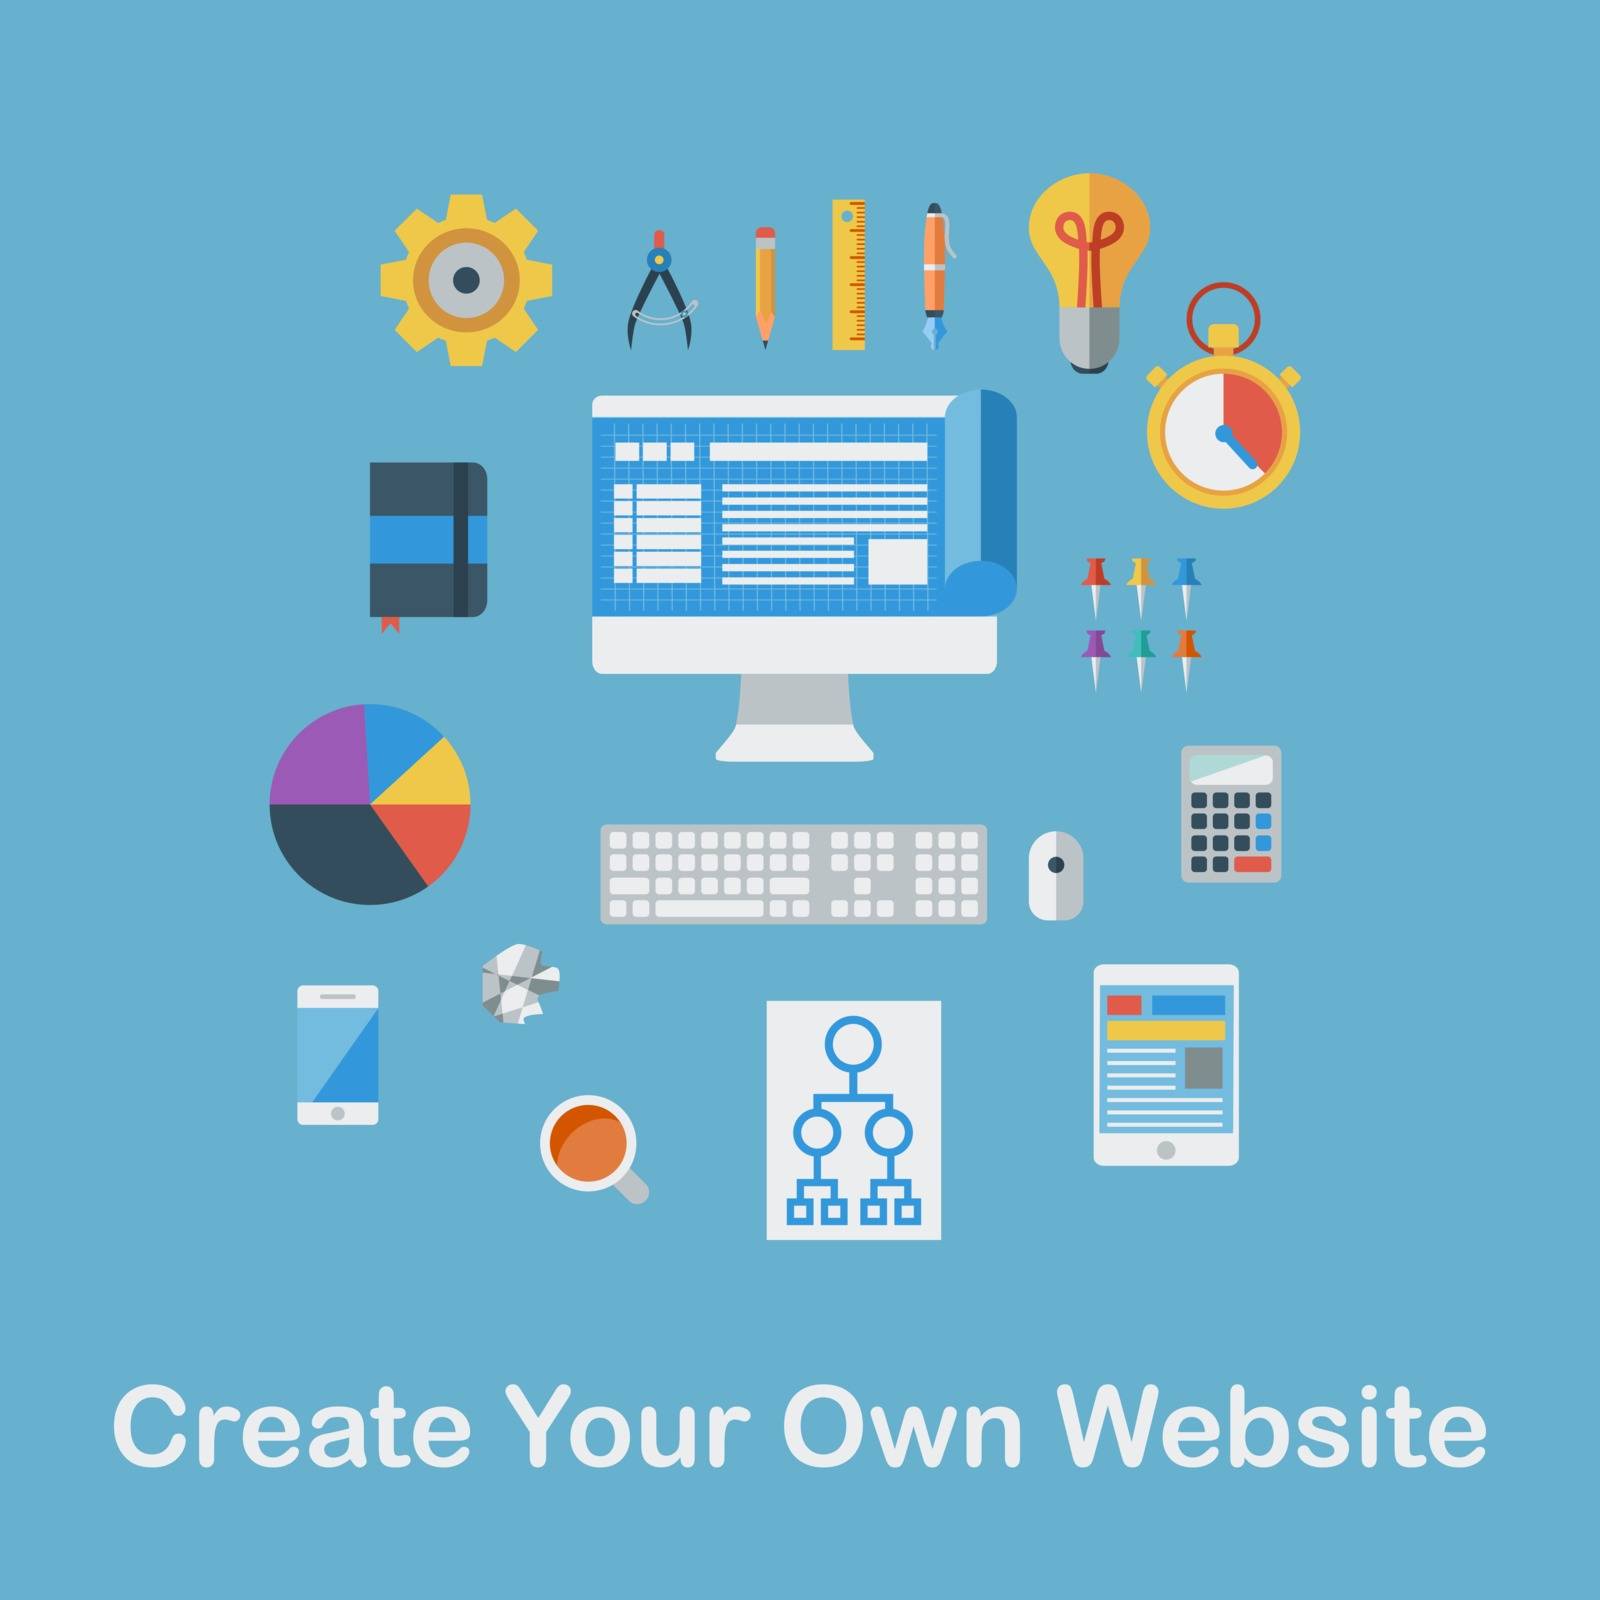 Create Your Own Website by smoki